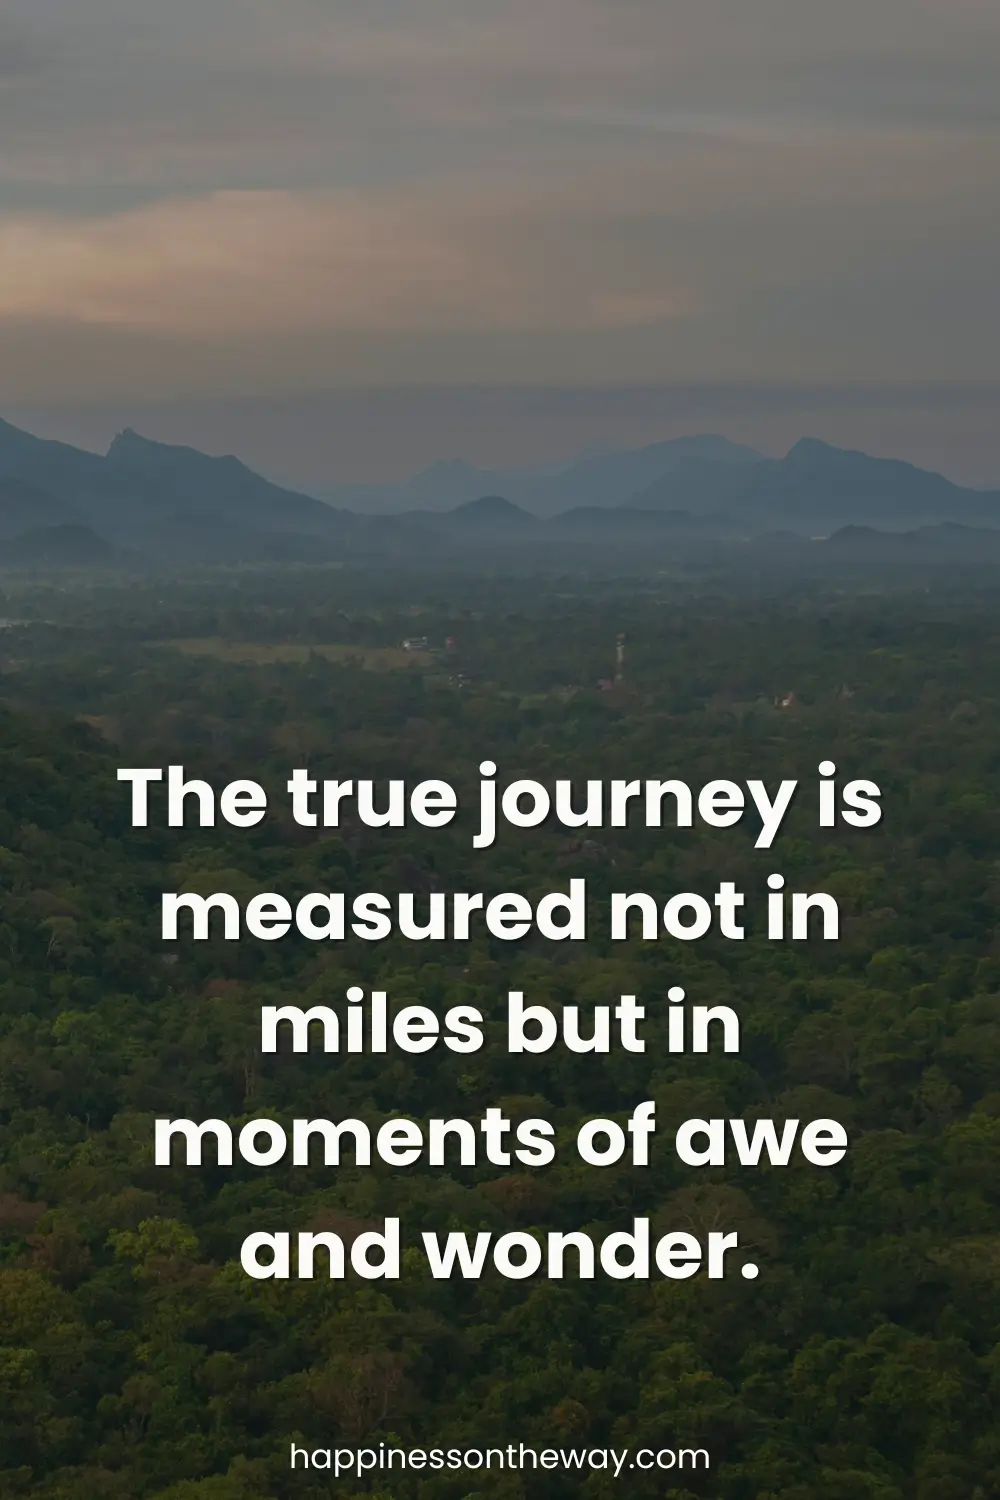 Scenic landscape of a valley with misty mountains under a dusk sky, paired with the quote 'The true journey is measured not in miles but in moments of awe and wonder.'